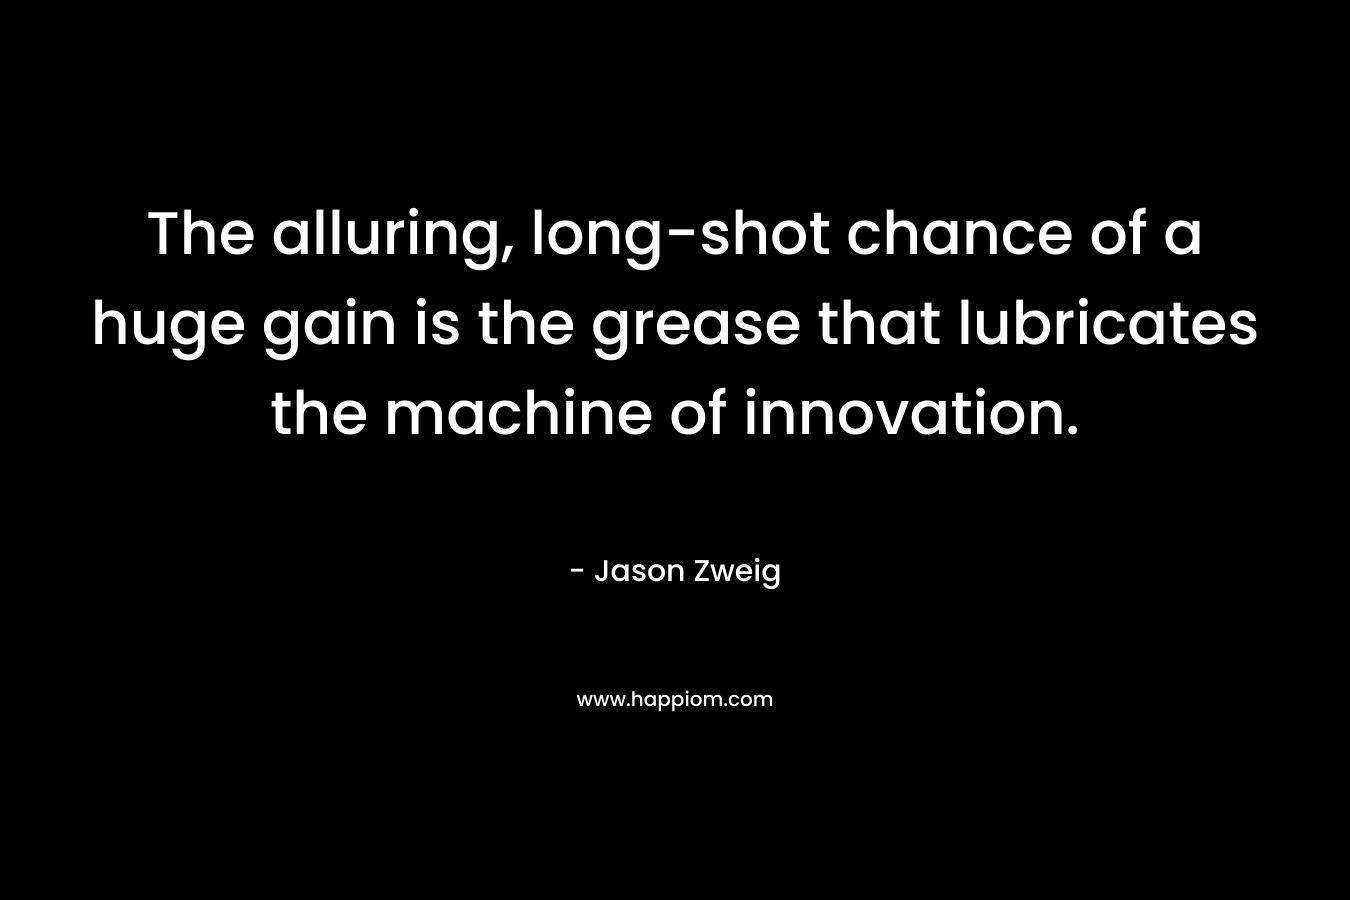 The alluring, long-shot chance of a huge gain is the grease that lubricates the machine of innovation. – Jason Zweig